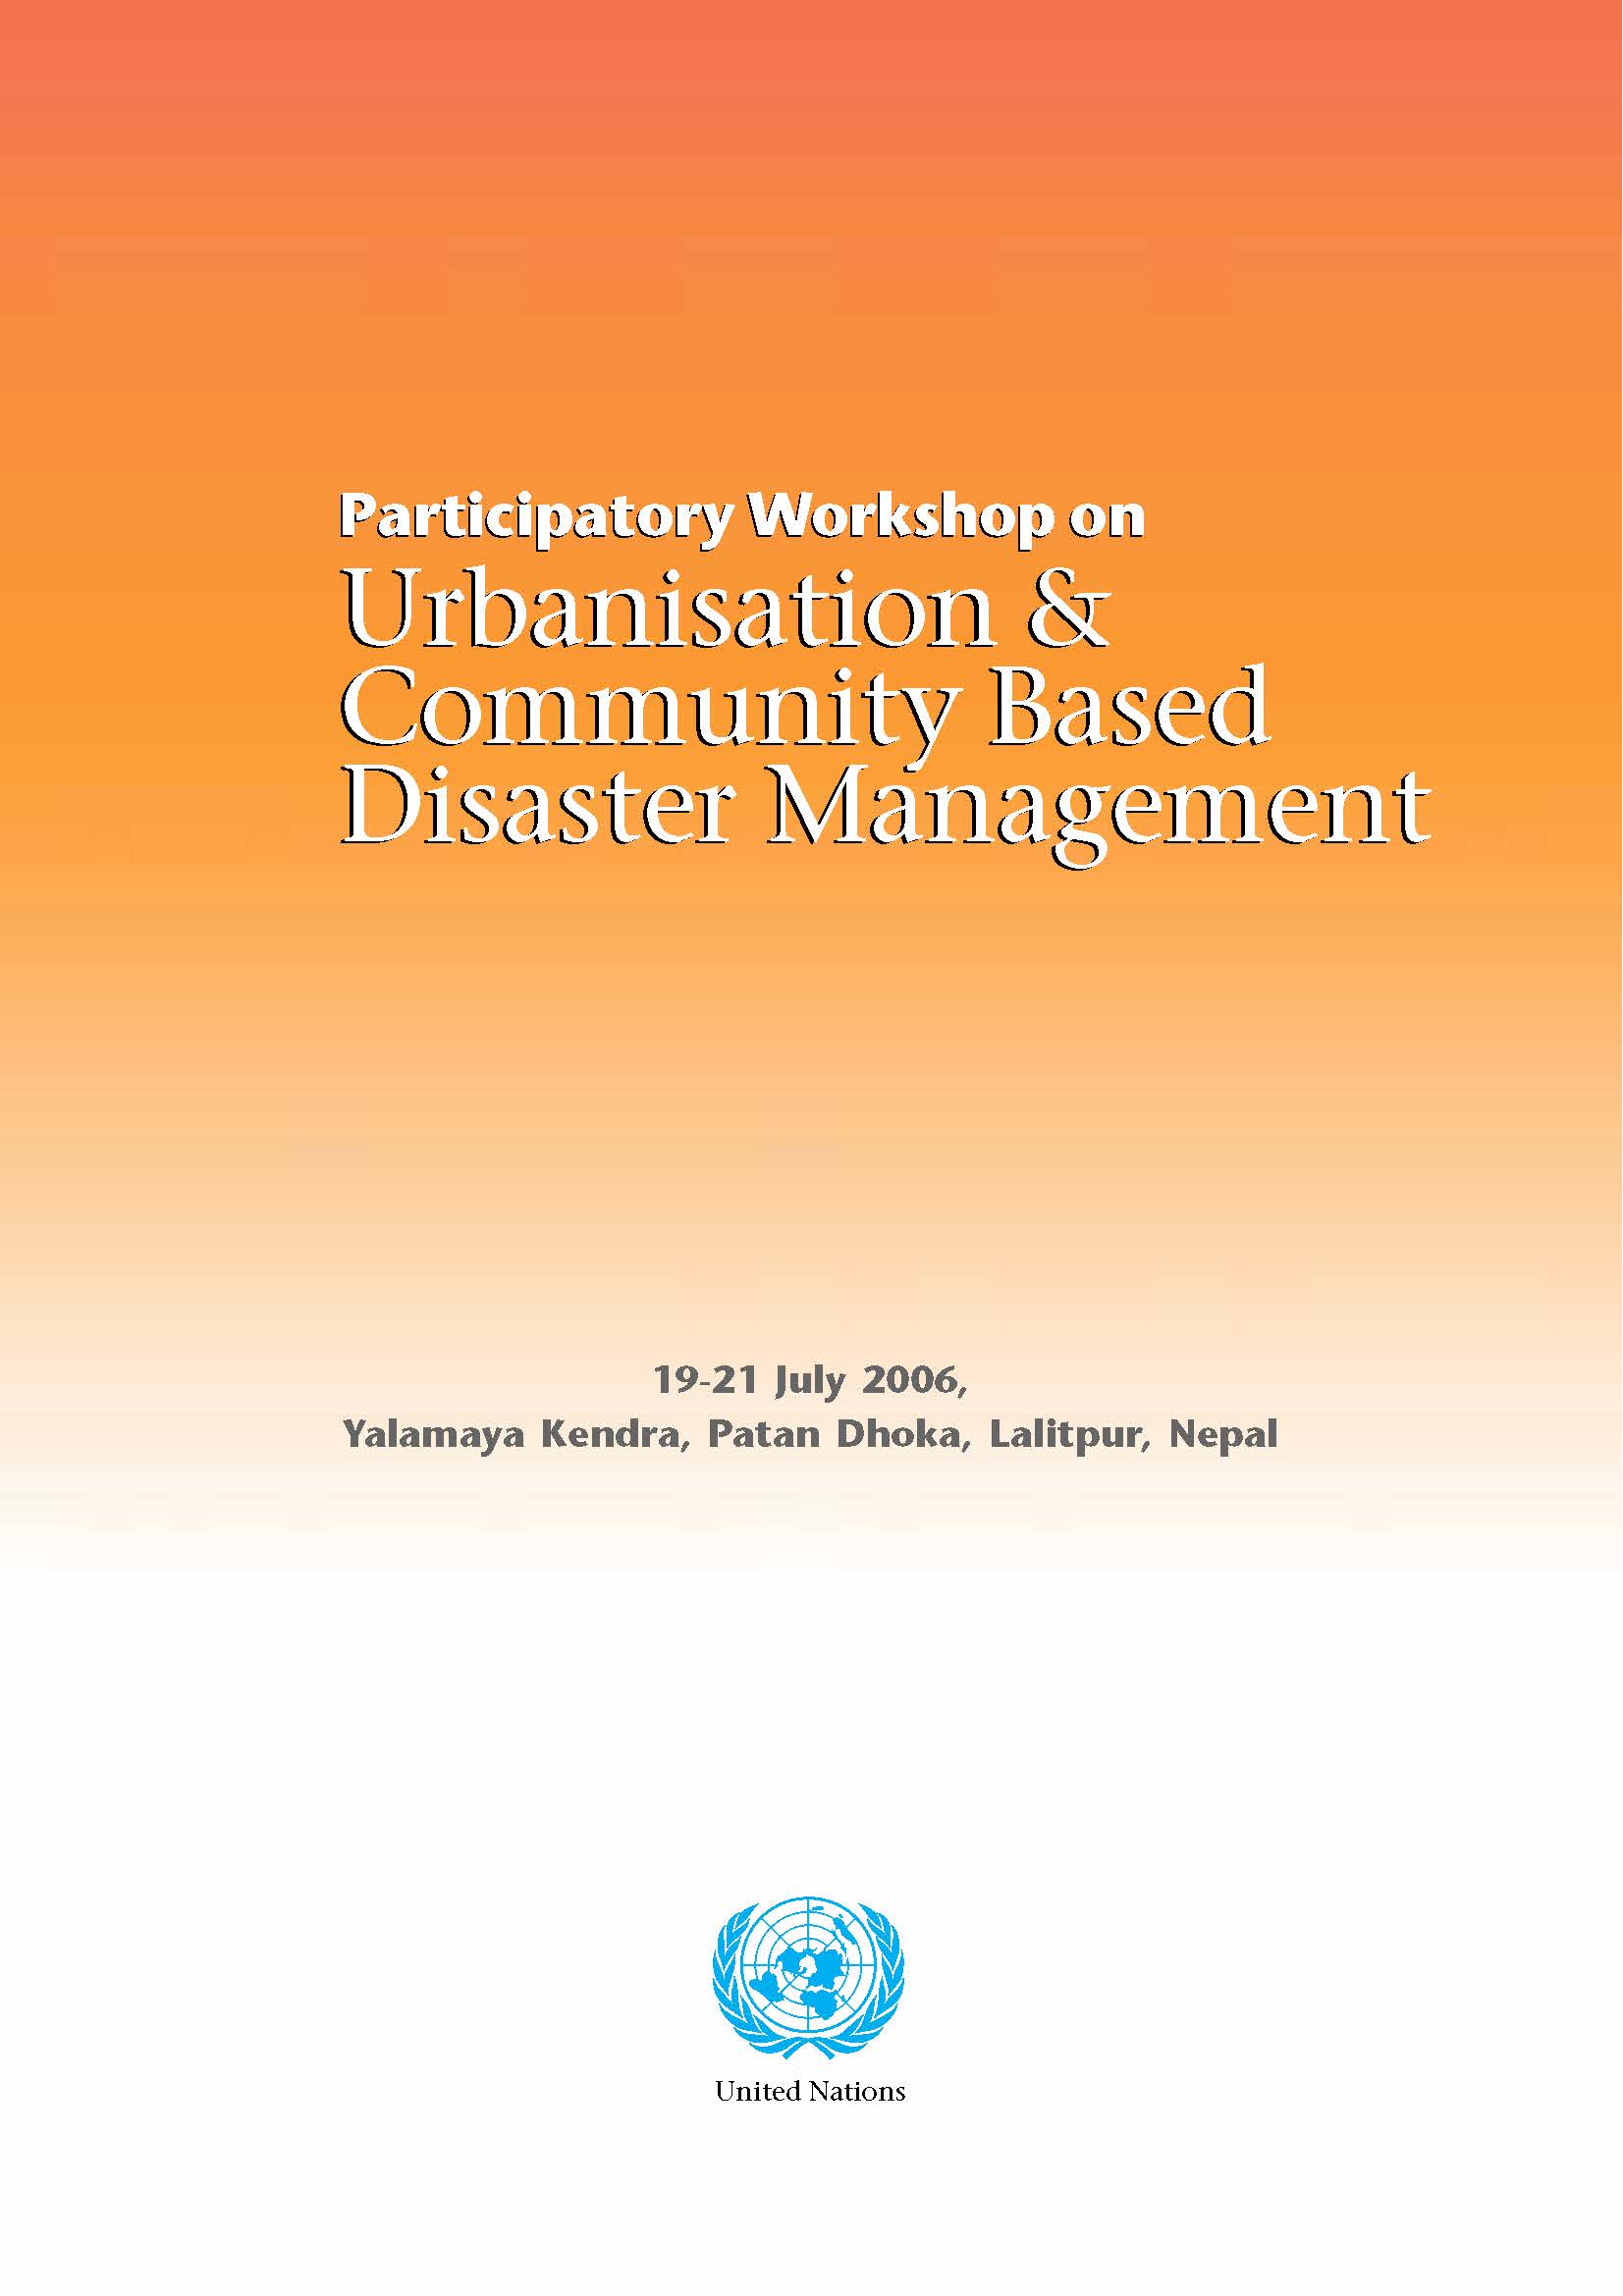 Cover of Proceedings on Participatory Workshop on Urbanisation & Community Based Disaster Management